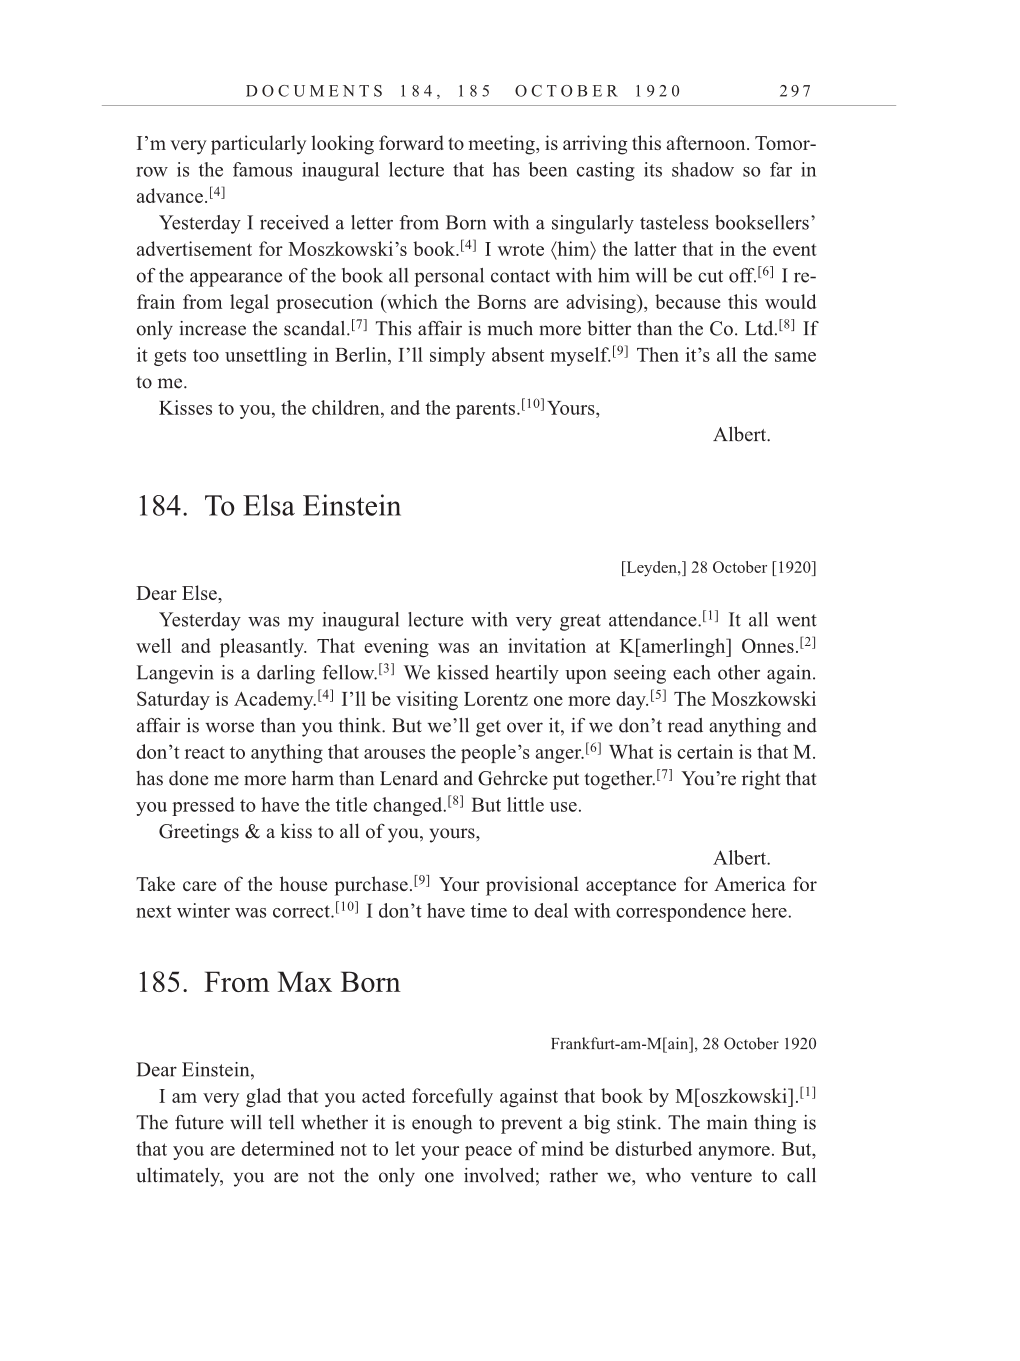 Volume 10: The Berlin Years: Correspondence, May-December 1920, and Supplementary Correspondence, 1909-1920 (English translation supplement) page 297